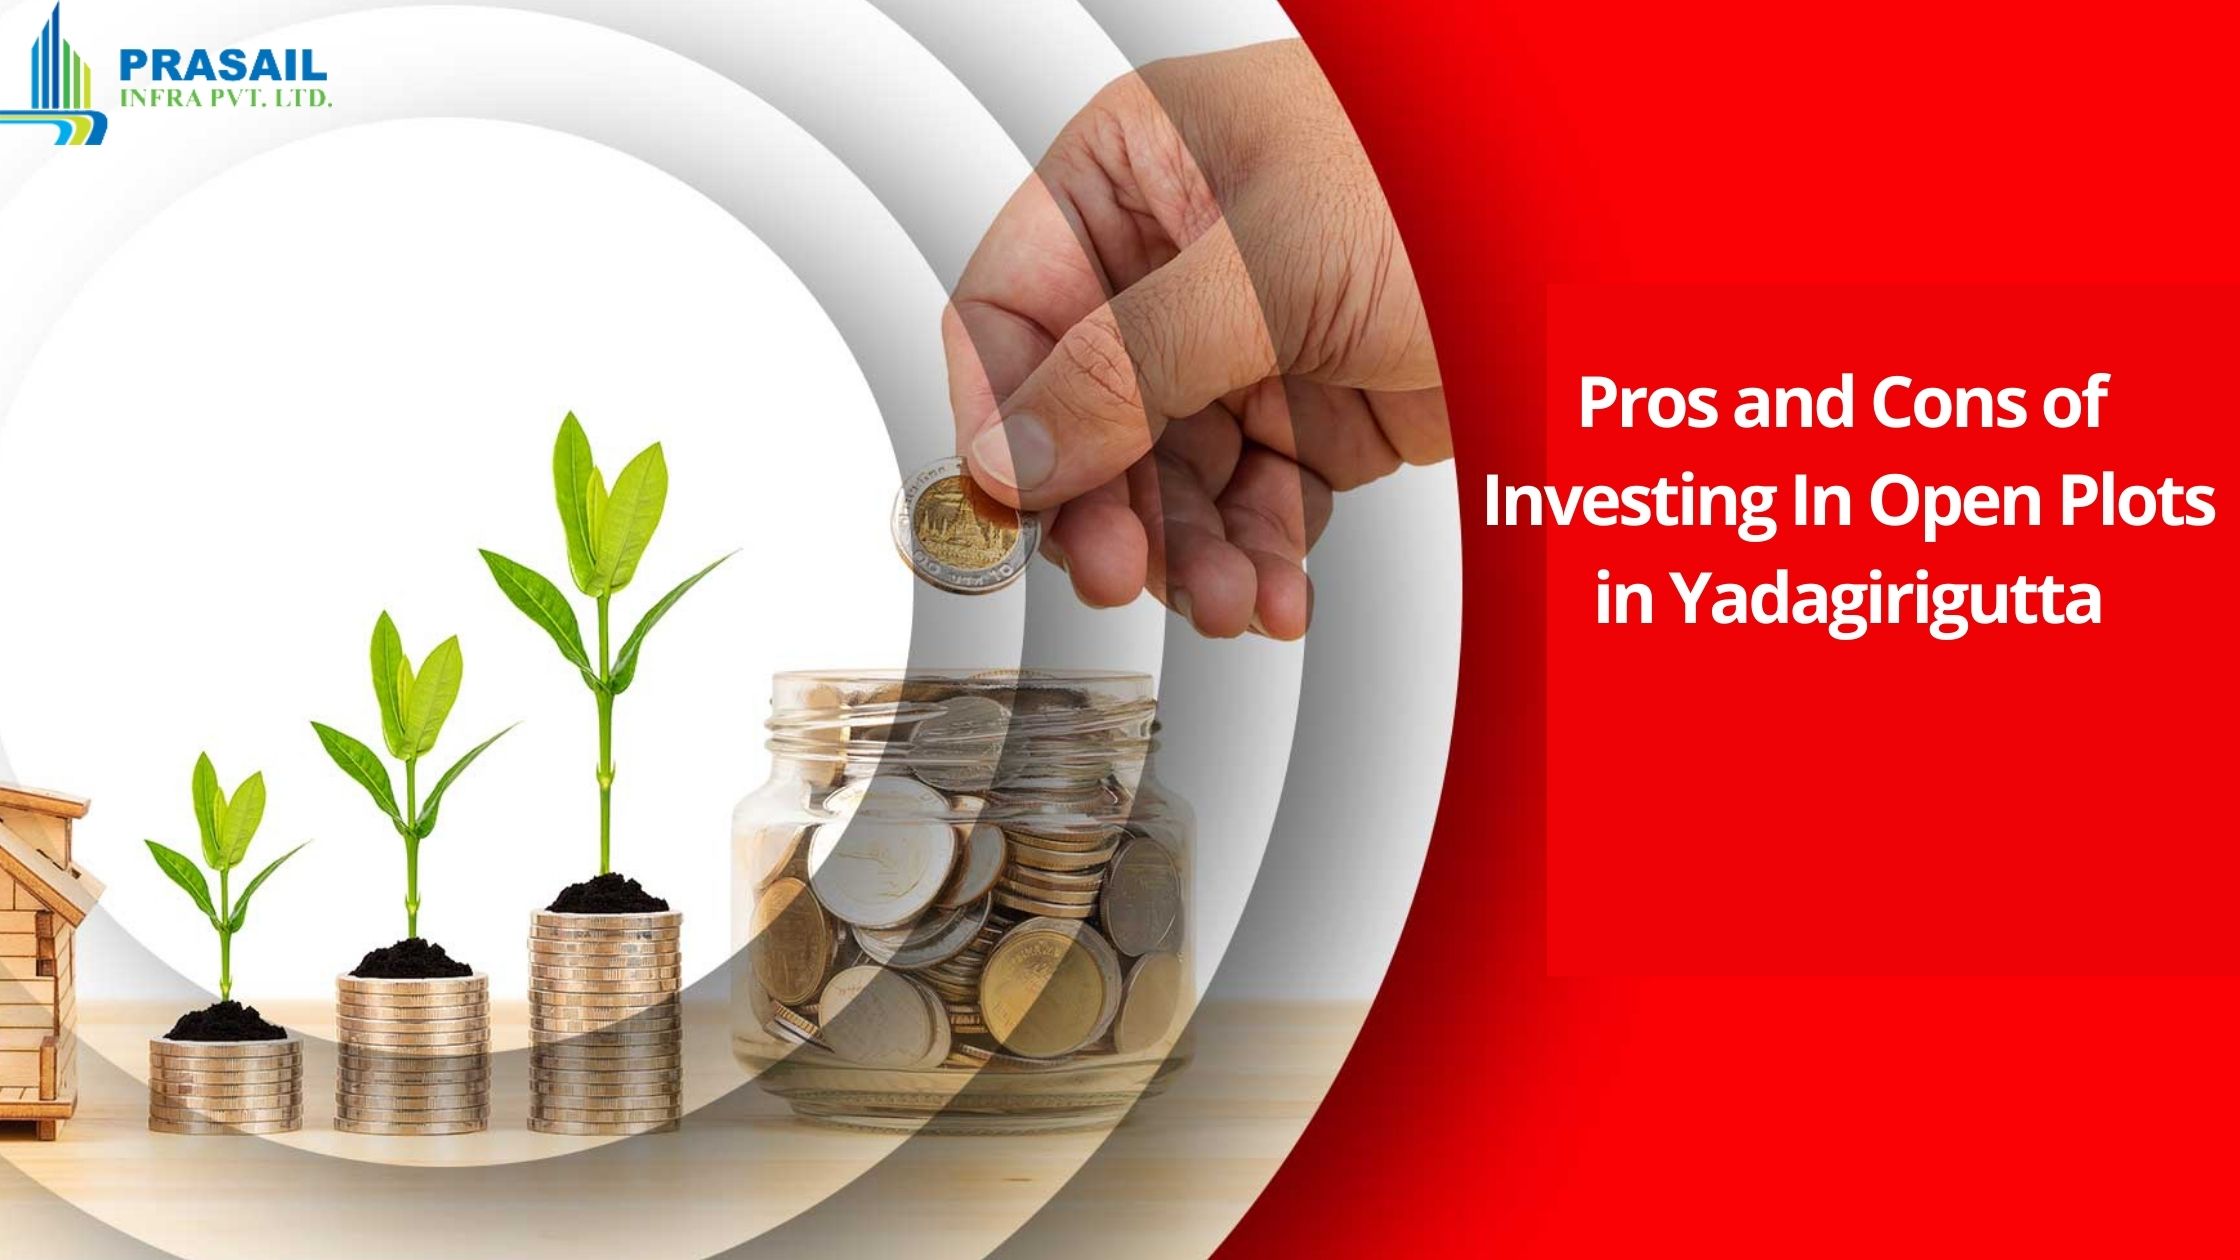 Pros and Cons of Investing In Open Plots in Yadagirigutta